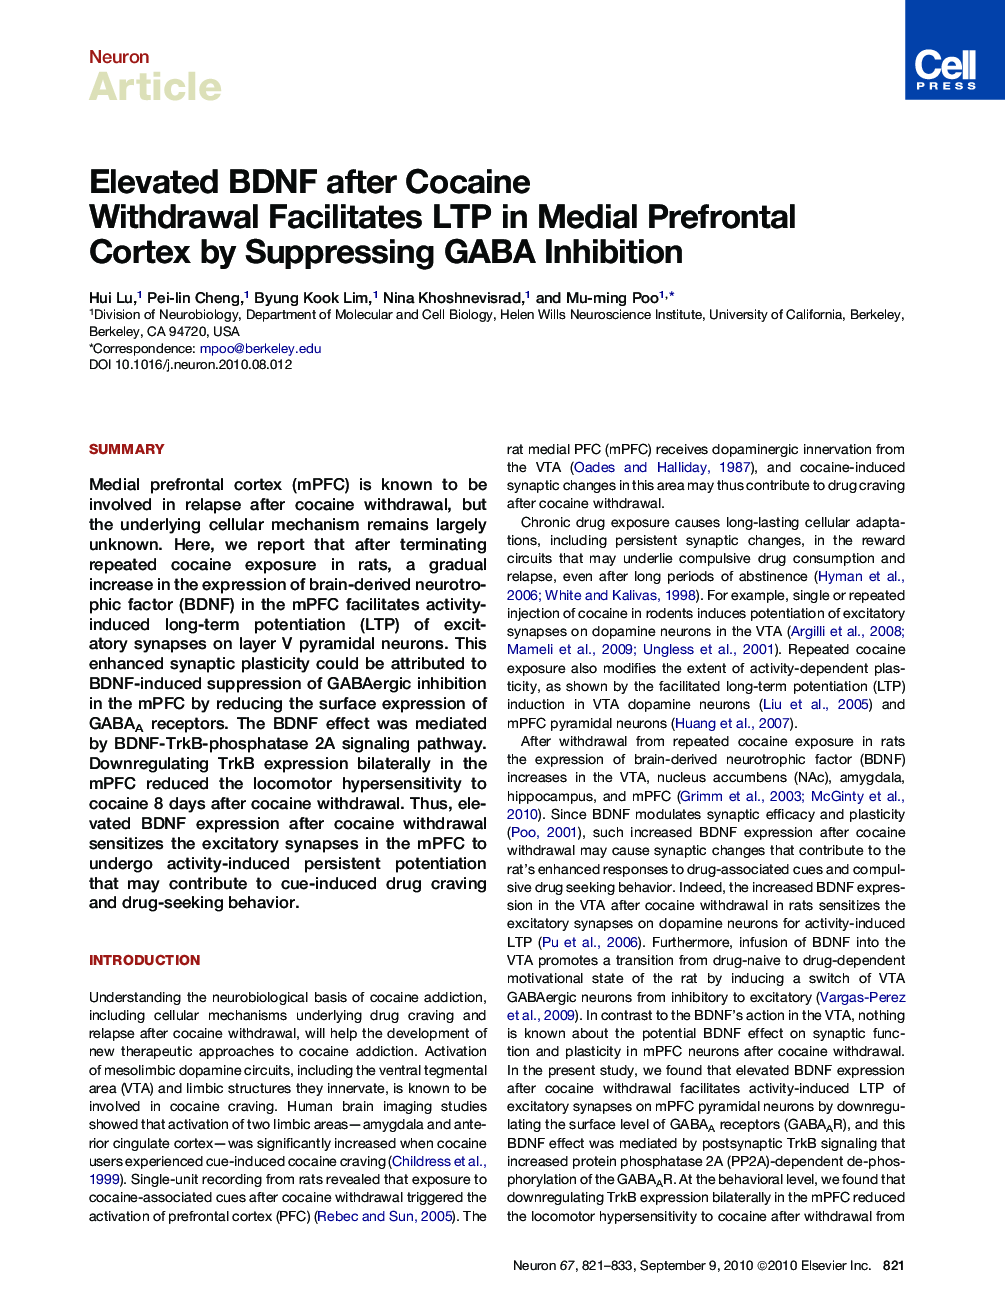 Elevated BDNF after Cocaine Withdrawal Facilitates LTP in Medial Prefrontal Cortex by Suppressing GABA Inhibition